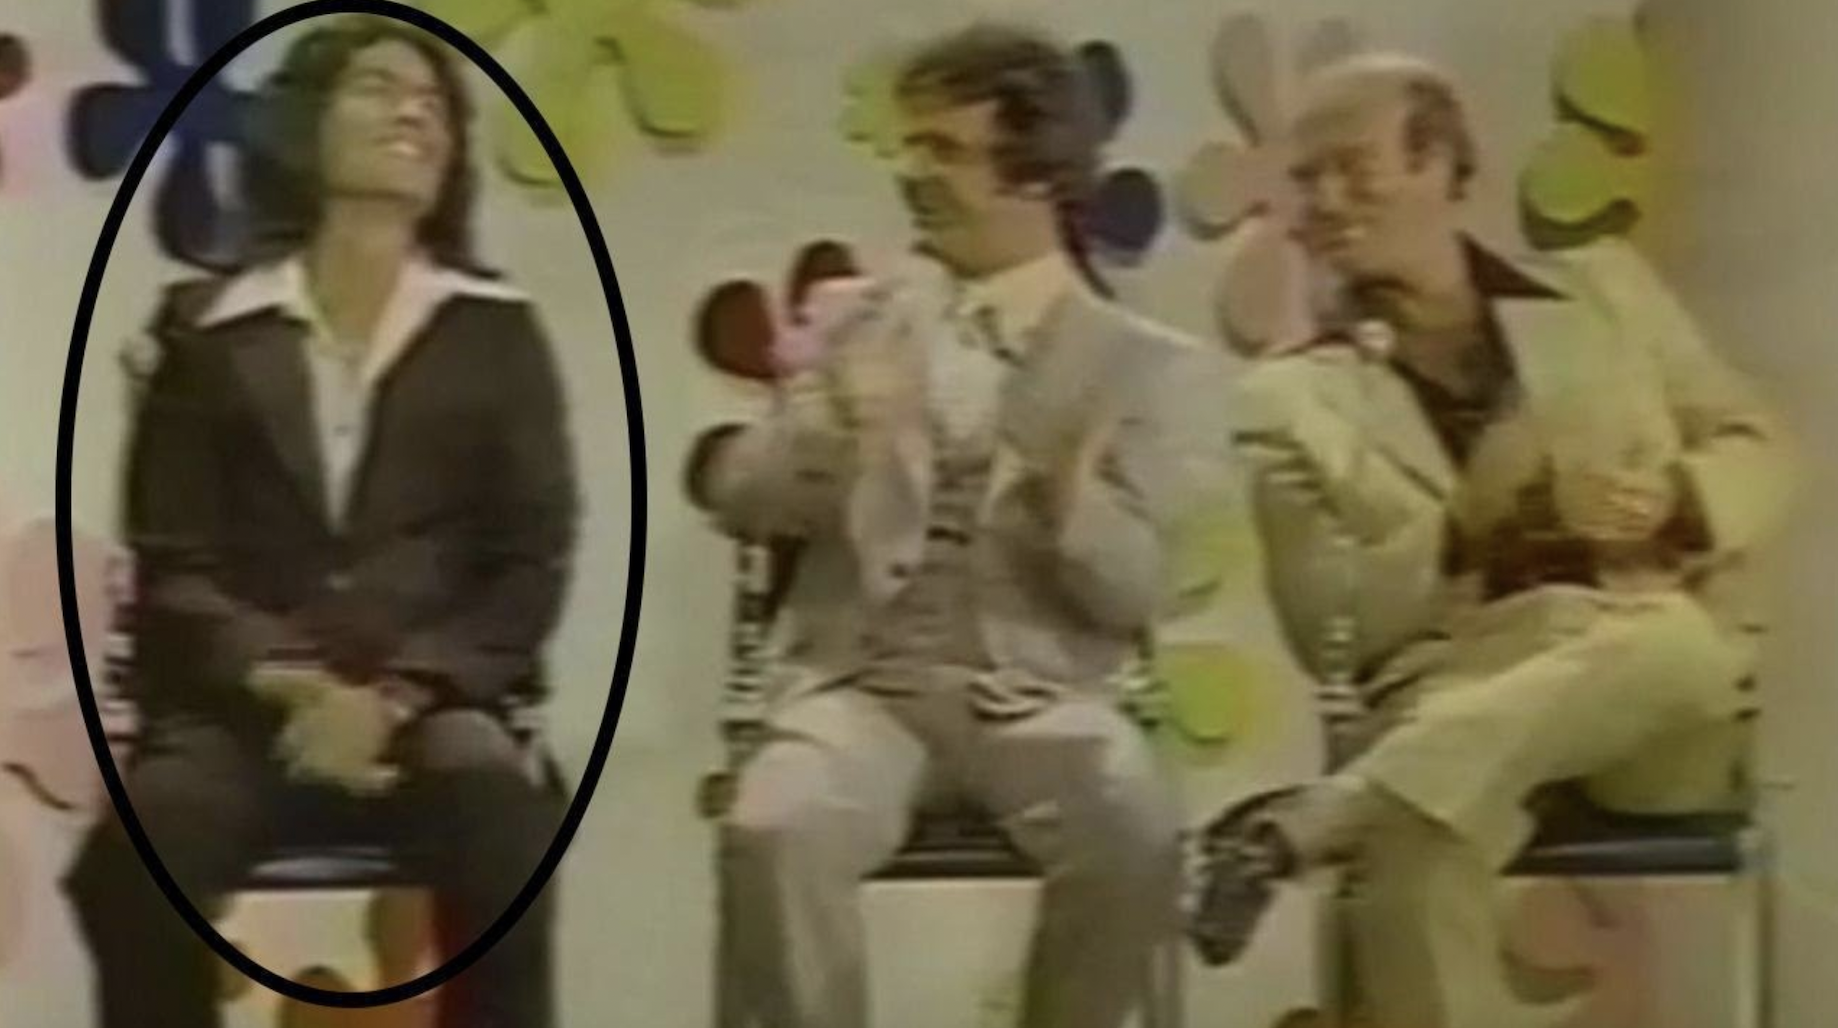 This is a pic of the 1970's-era gameshow, The Dating Game. The circled man is serial killer Rodney Alcala. By the time of that appearance on the show, he had raped several women and murdered at least one. He won the game, but the woman refused to go on the date with him because she felt like there were a lot of red flags. You can imagine how relieved she was.